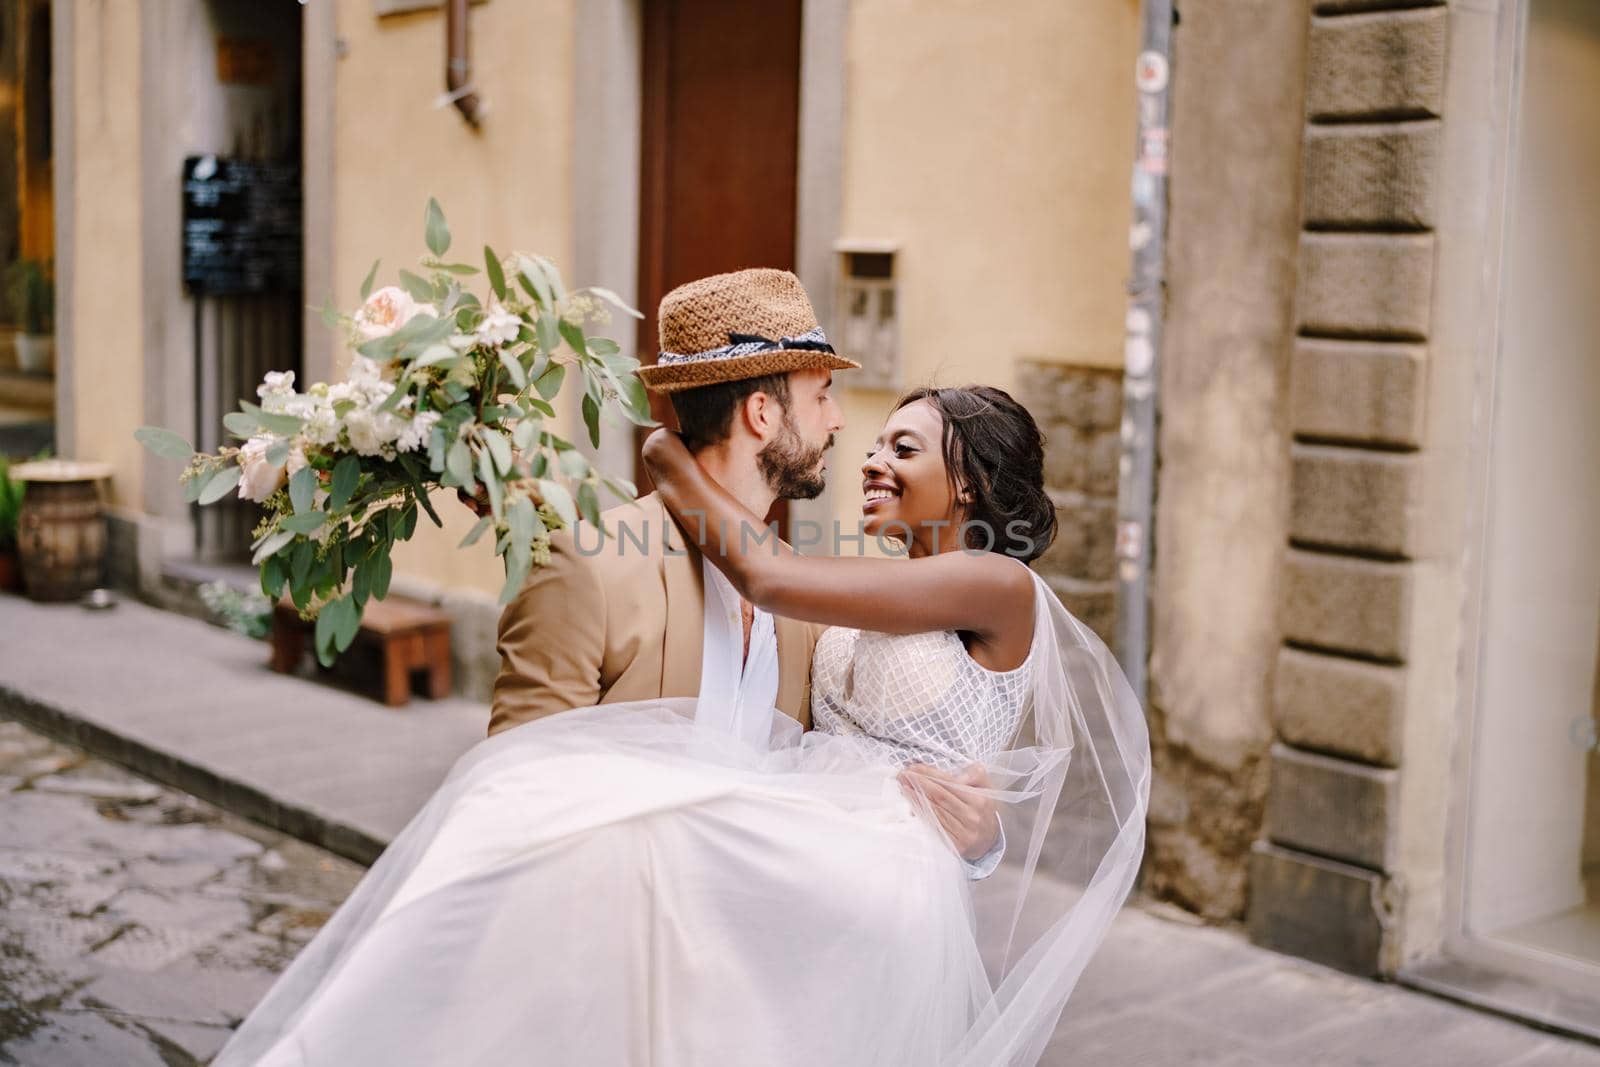 Caucasian groom circling African-American bride. Interracial wedding couple. Wedding in Florence, Italy